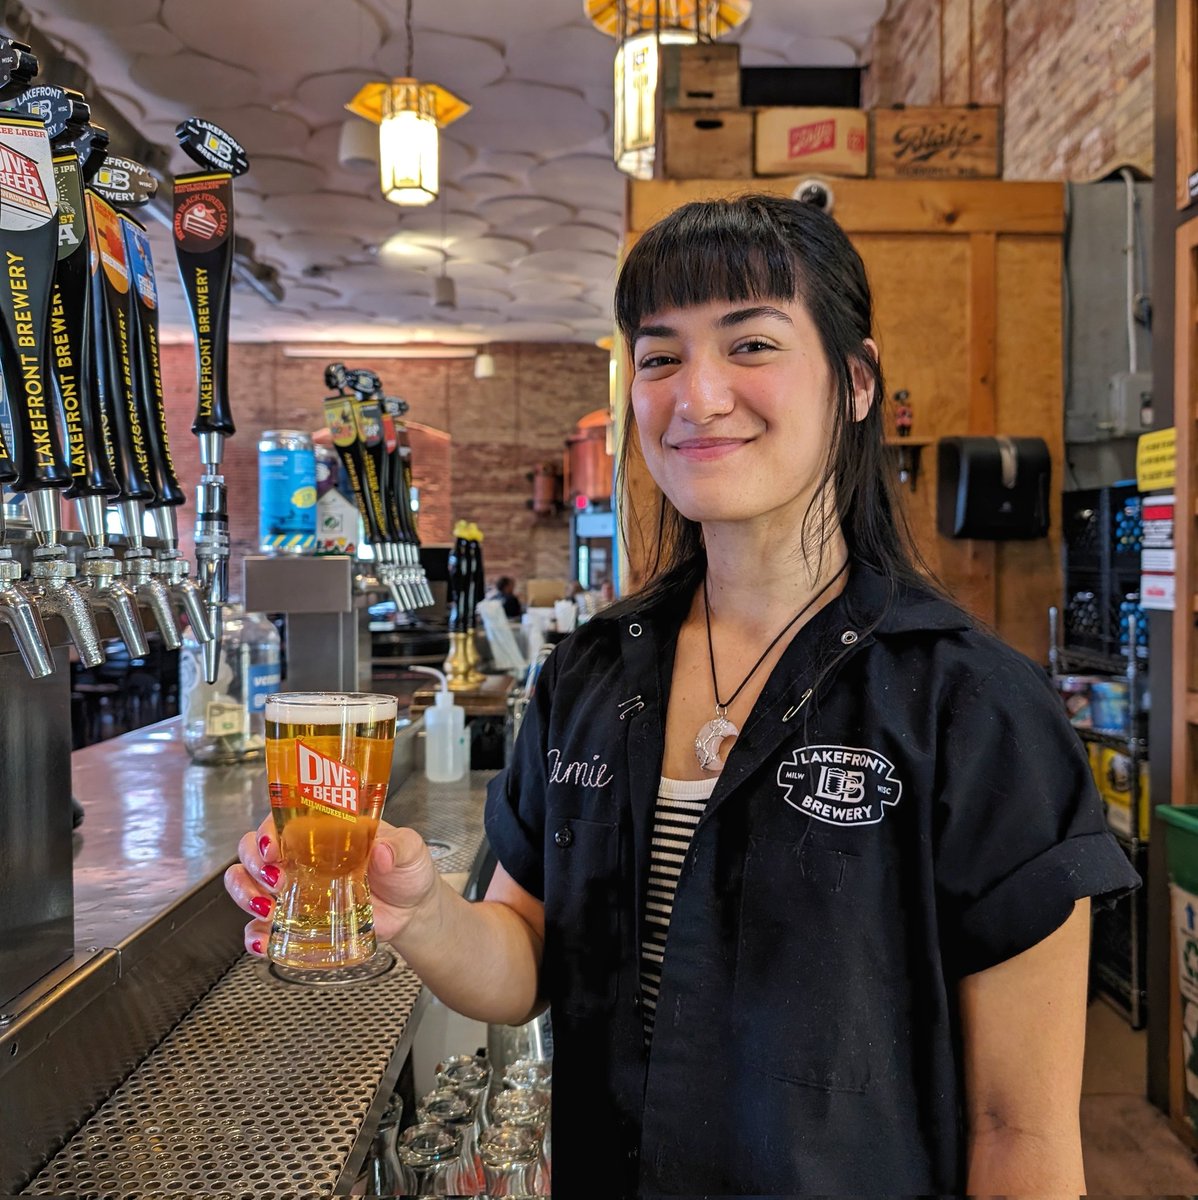 🚨Mondays are Dive Beer Night!🍺 1. Purchase this 10oz glass full of Dive Beer Milwaukee Lager for $4 at our taproom. 2. Bring it back any Monday for $1 Dive Beer refills! 3. Repeat step 2 every Monday. Offer valid 3-9pm Mondays at Lakefront Brewery Beer Hall.